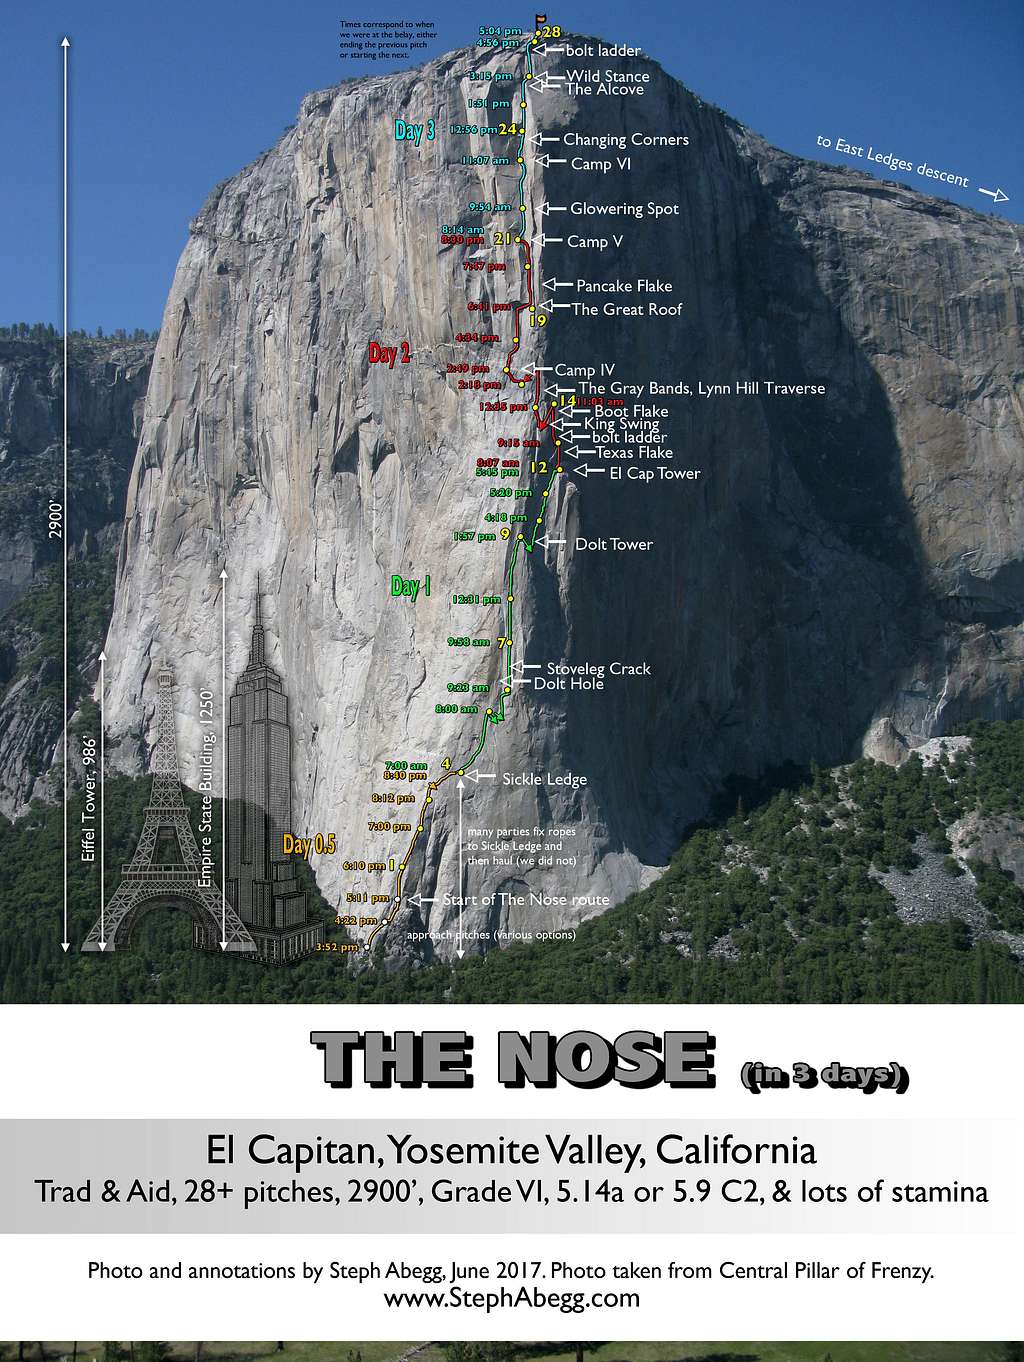 Overlay of The Nose on El Capitan